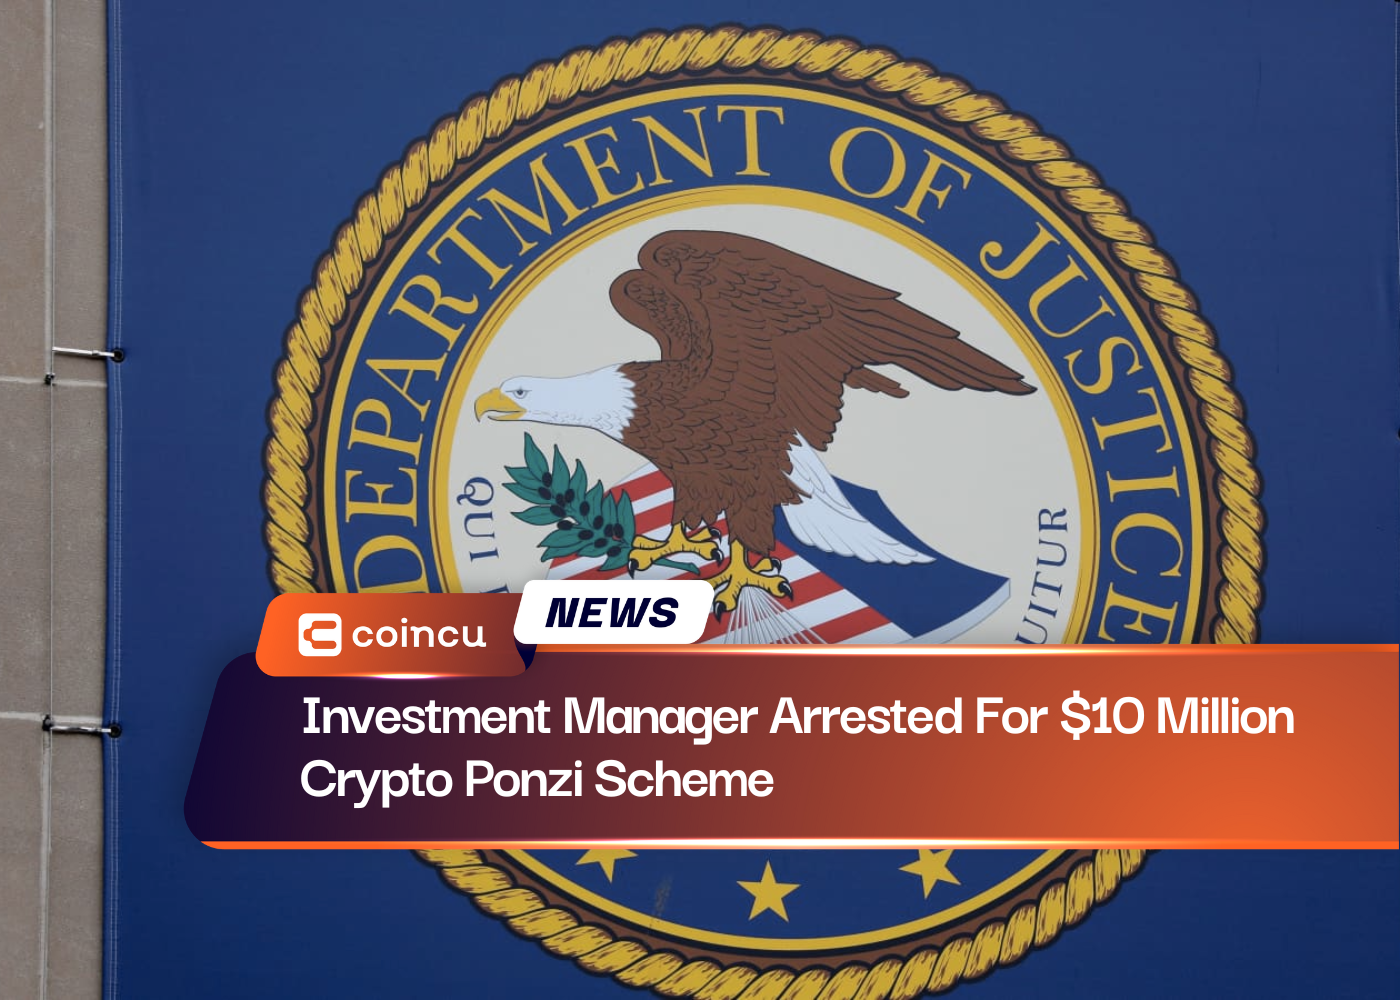 Investment Manager Arrested For $10 Million Crypto Ponzi Scheme